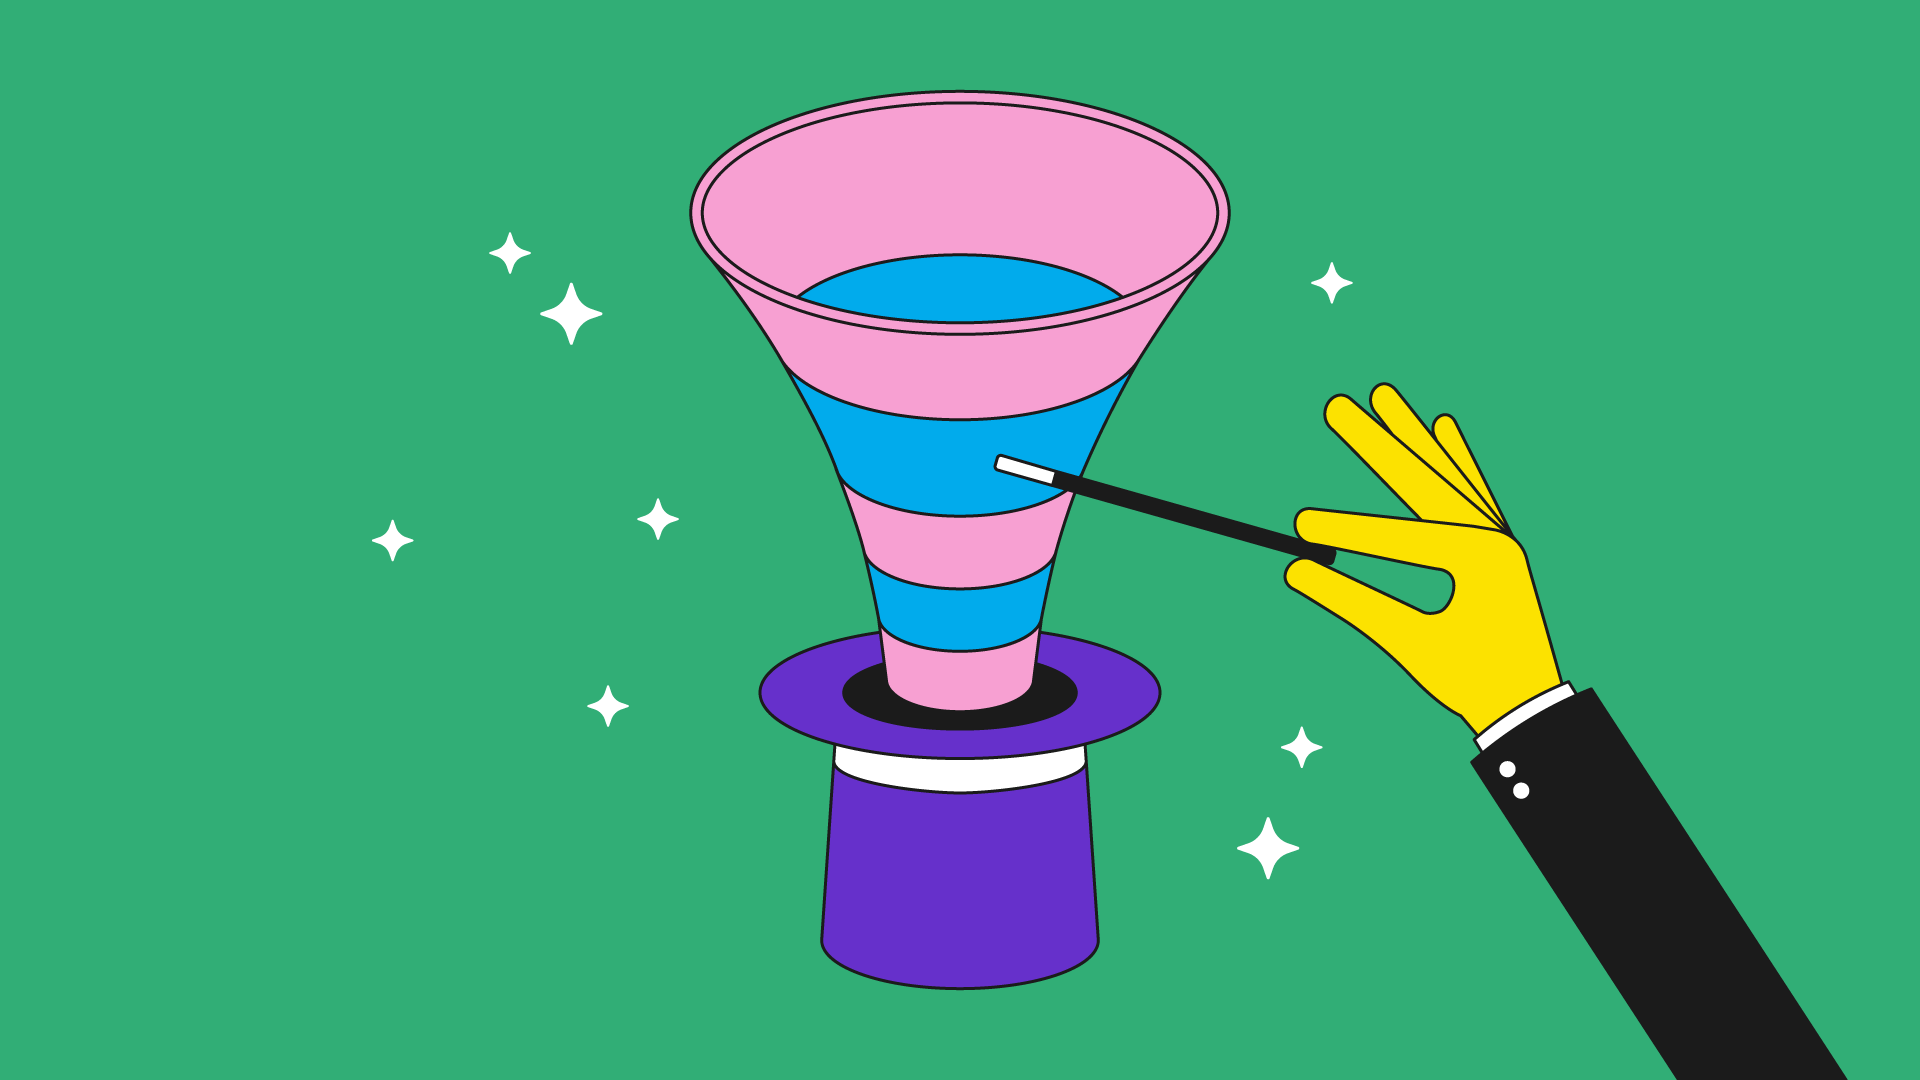 A funnel being drawn from a top hat